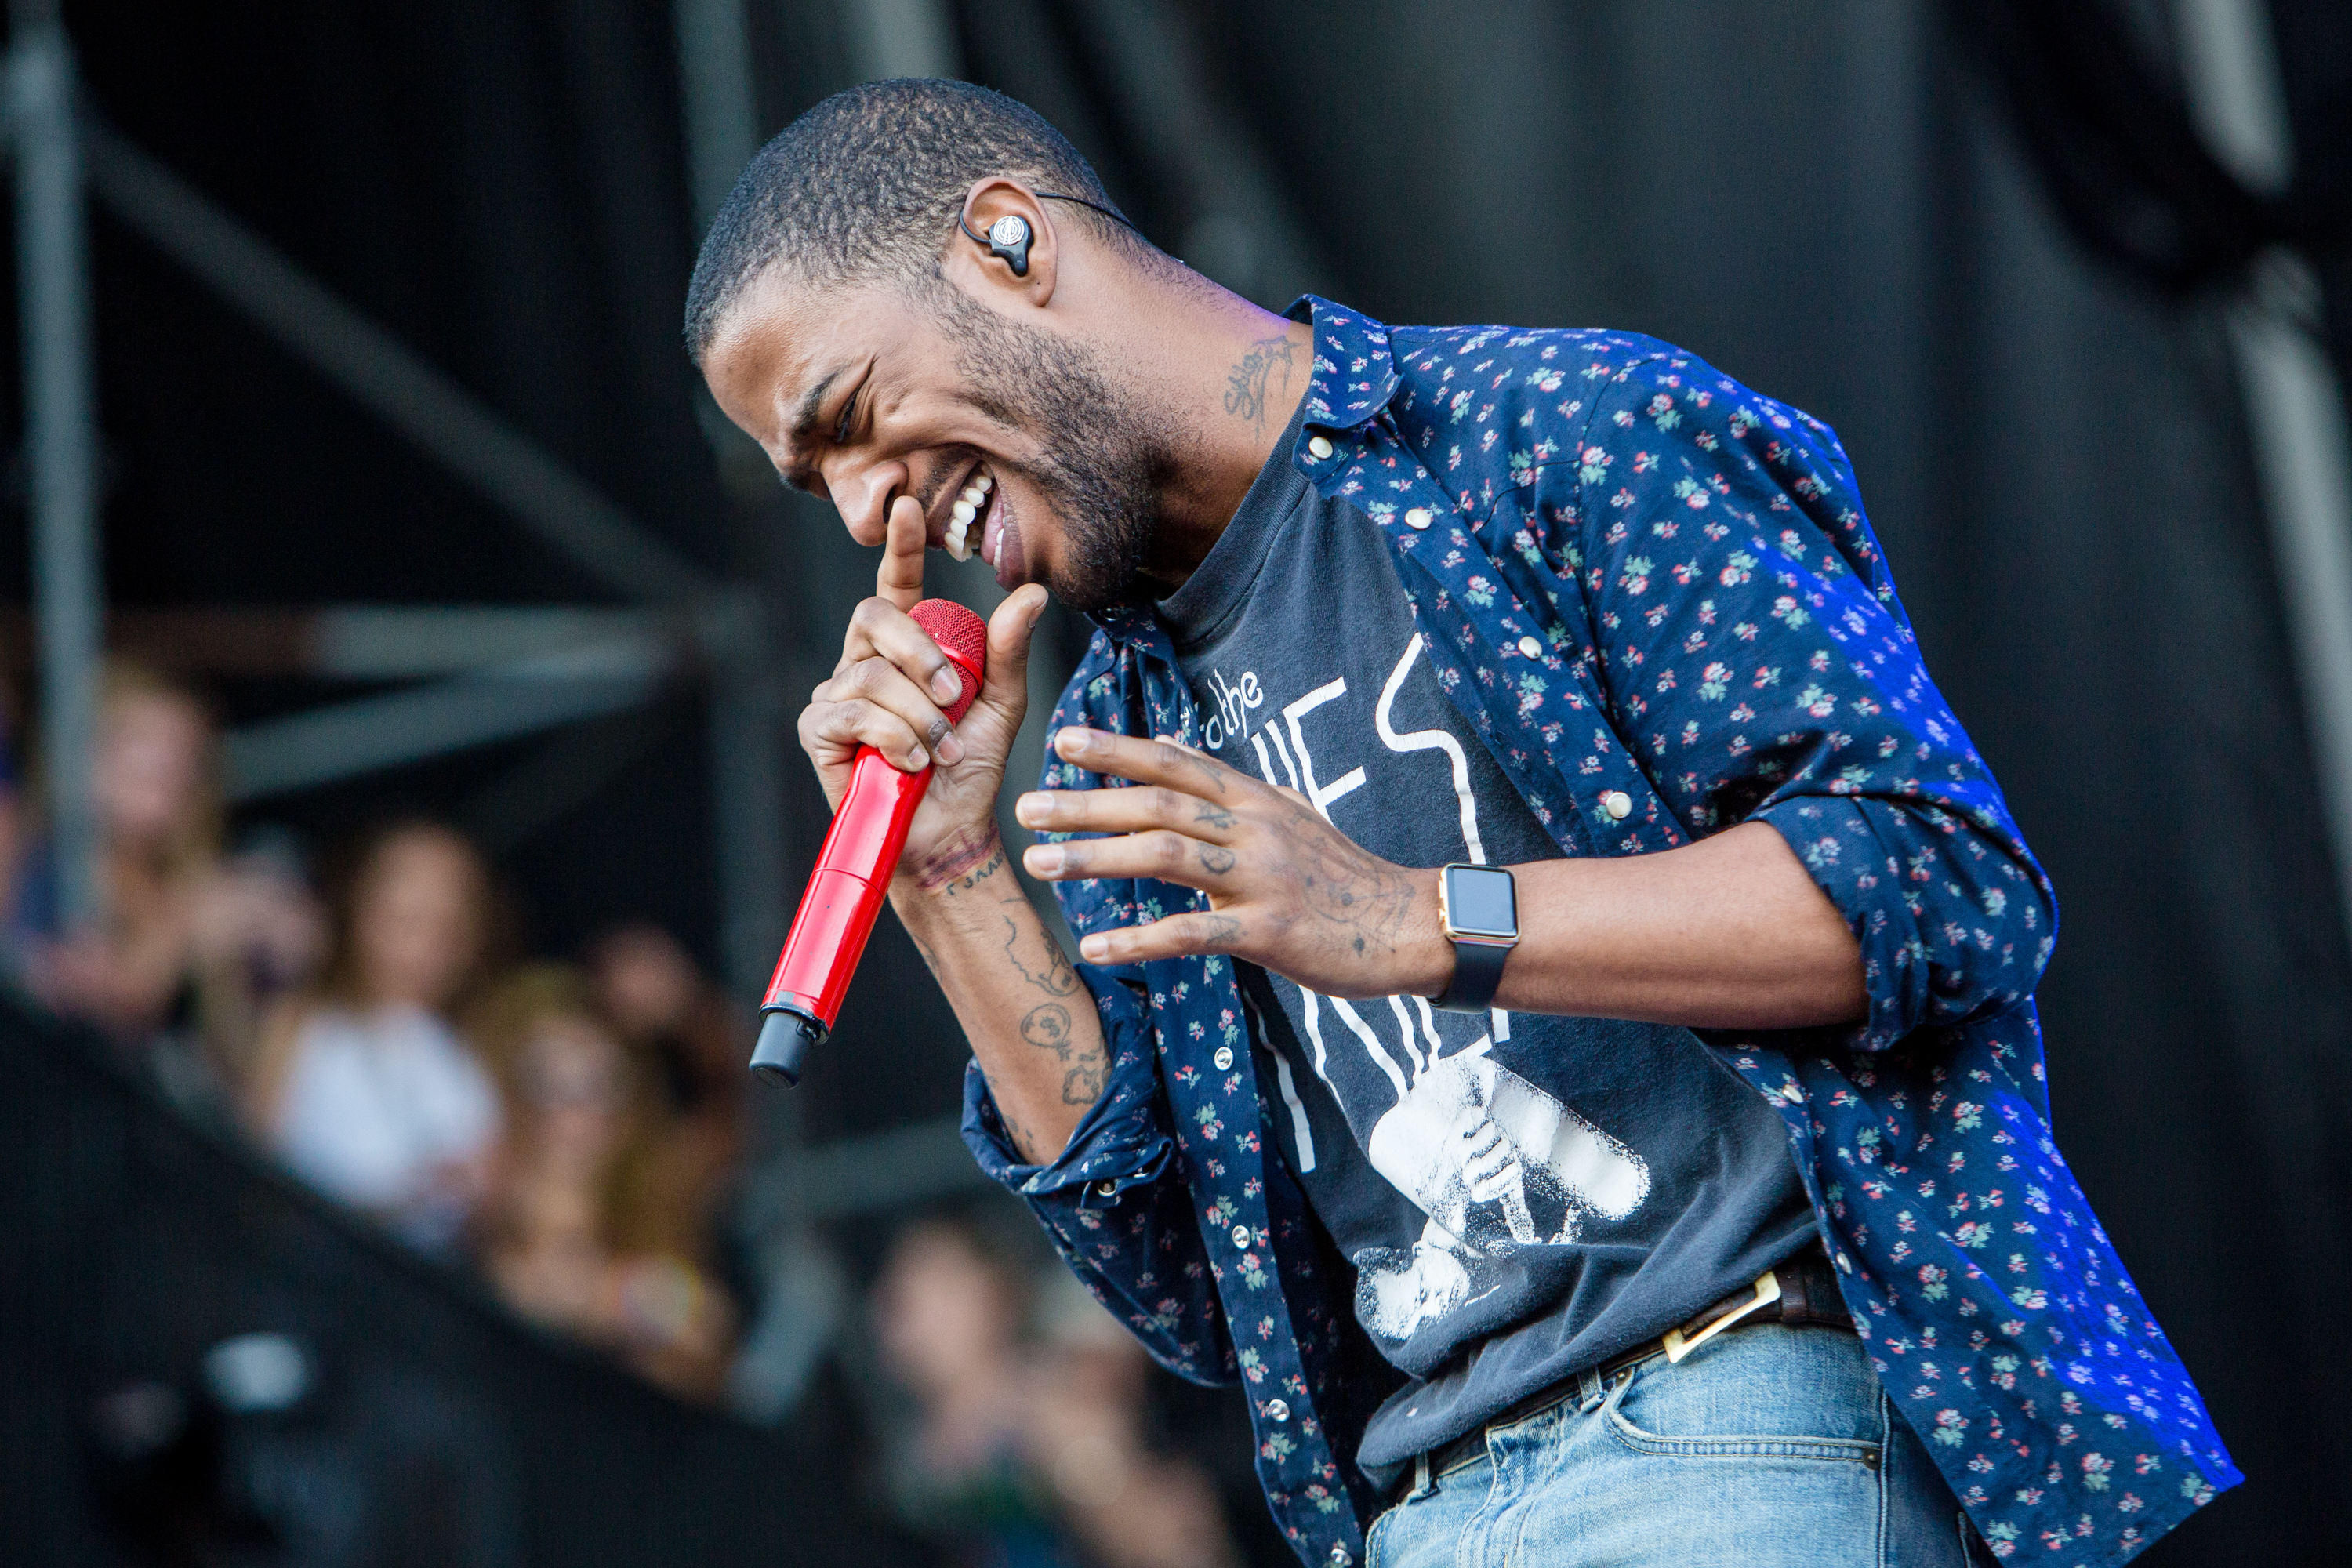 Kid Cudi performs at the 2015 Lollapalooza music festival at Grant Park on Aug. 1, 2015 in Chicago, Illinois. (Josh Braste—/FilmMagic/Getty Images)